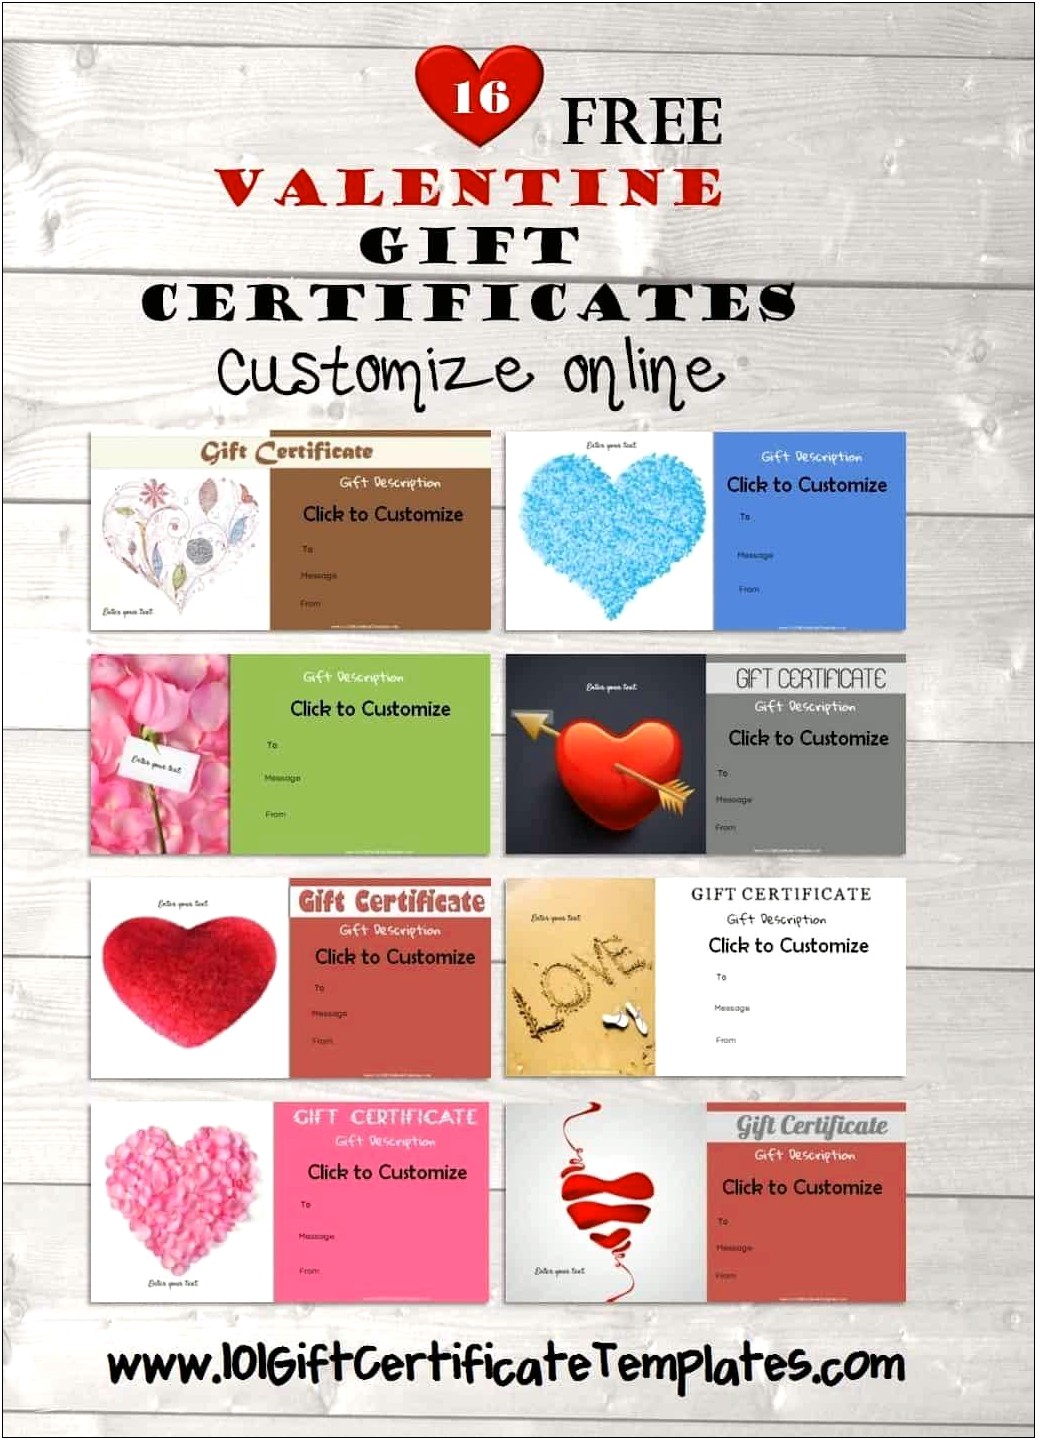 St Valentine's Day Cards Templates Free